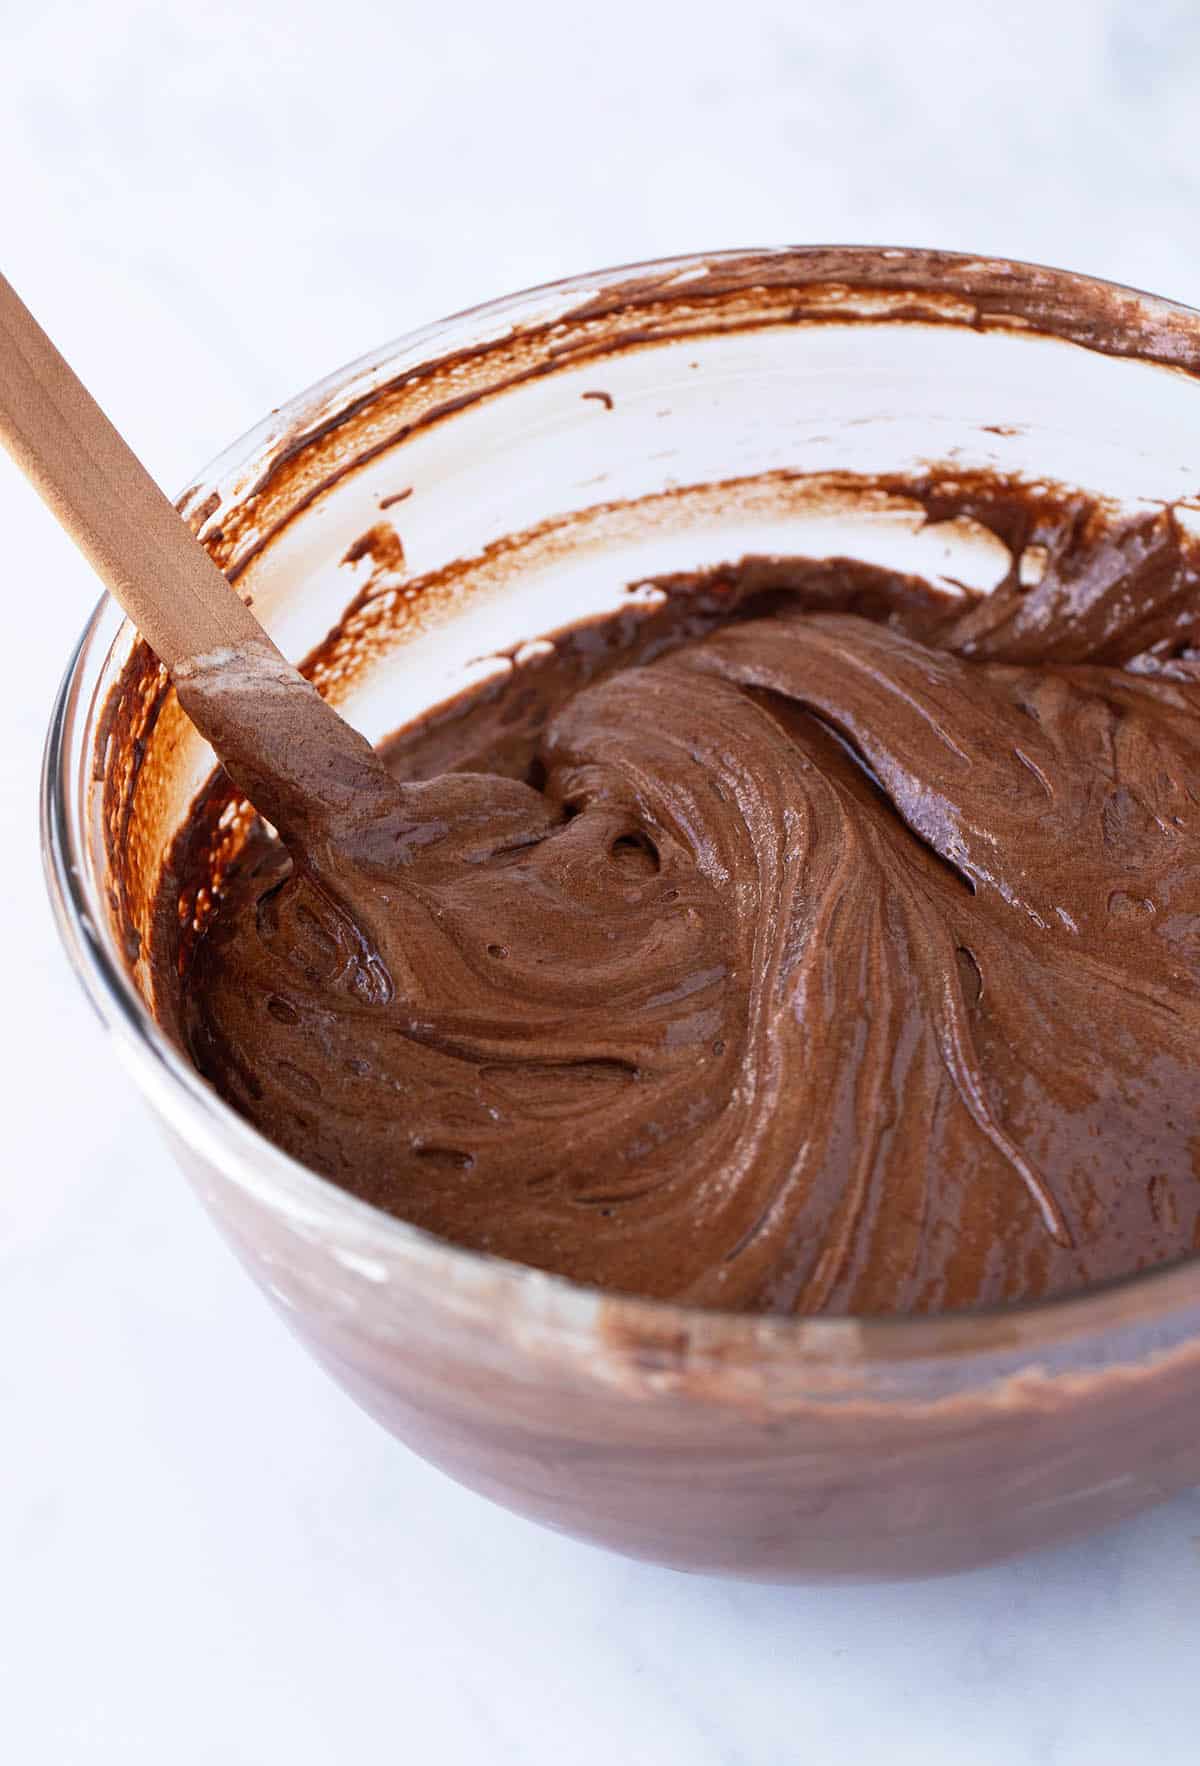 A glass bowl full of chocolate cake batter.